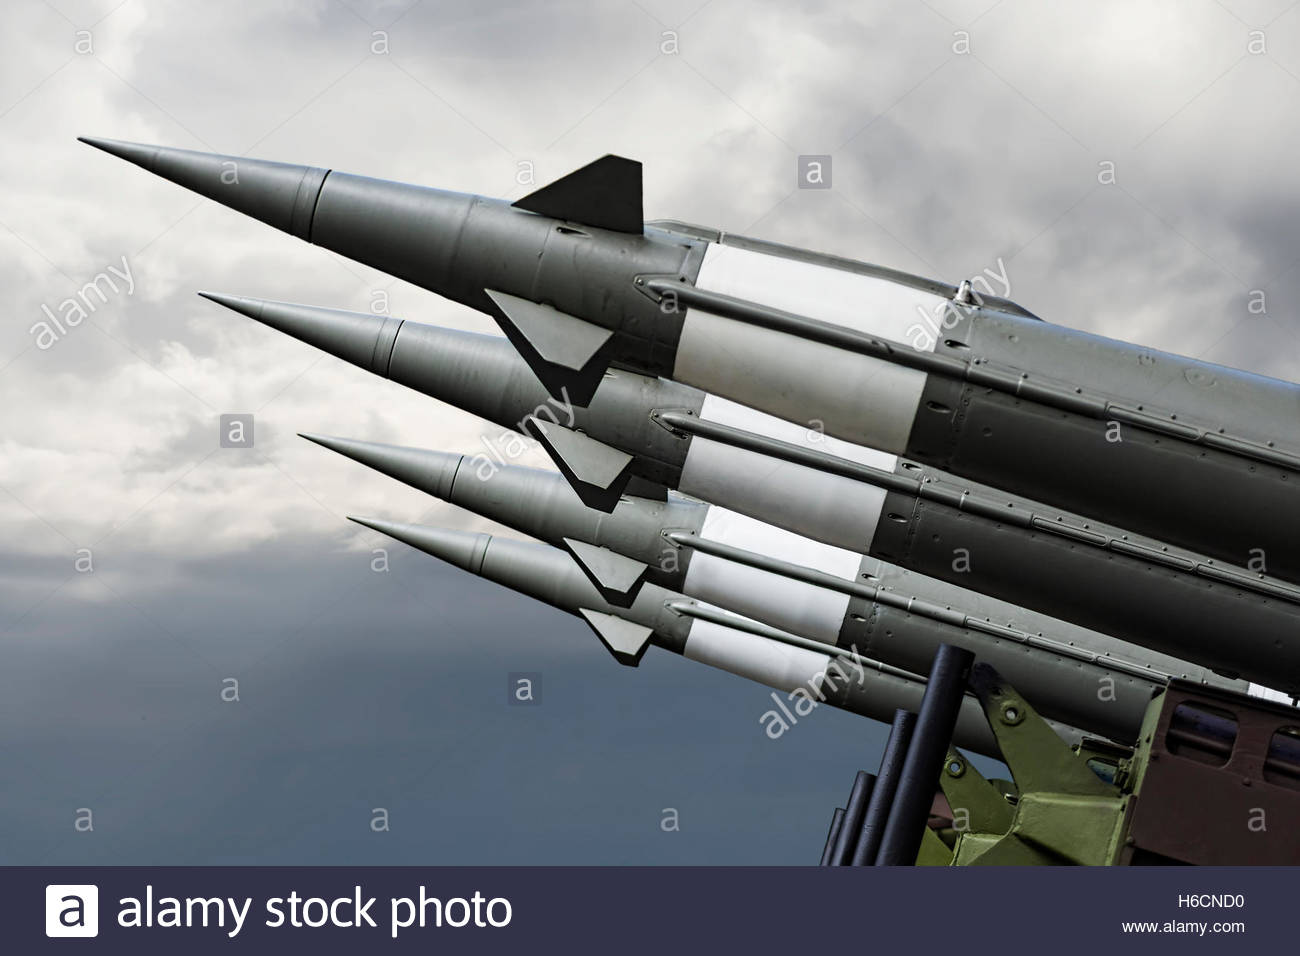 Nuclear Missiles With Warhead Aimed At Gloomy Sky Balistic